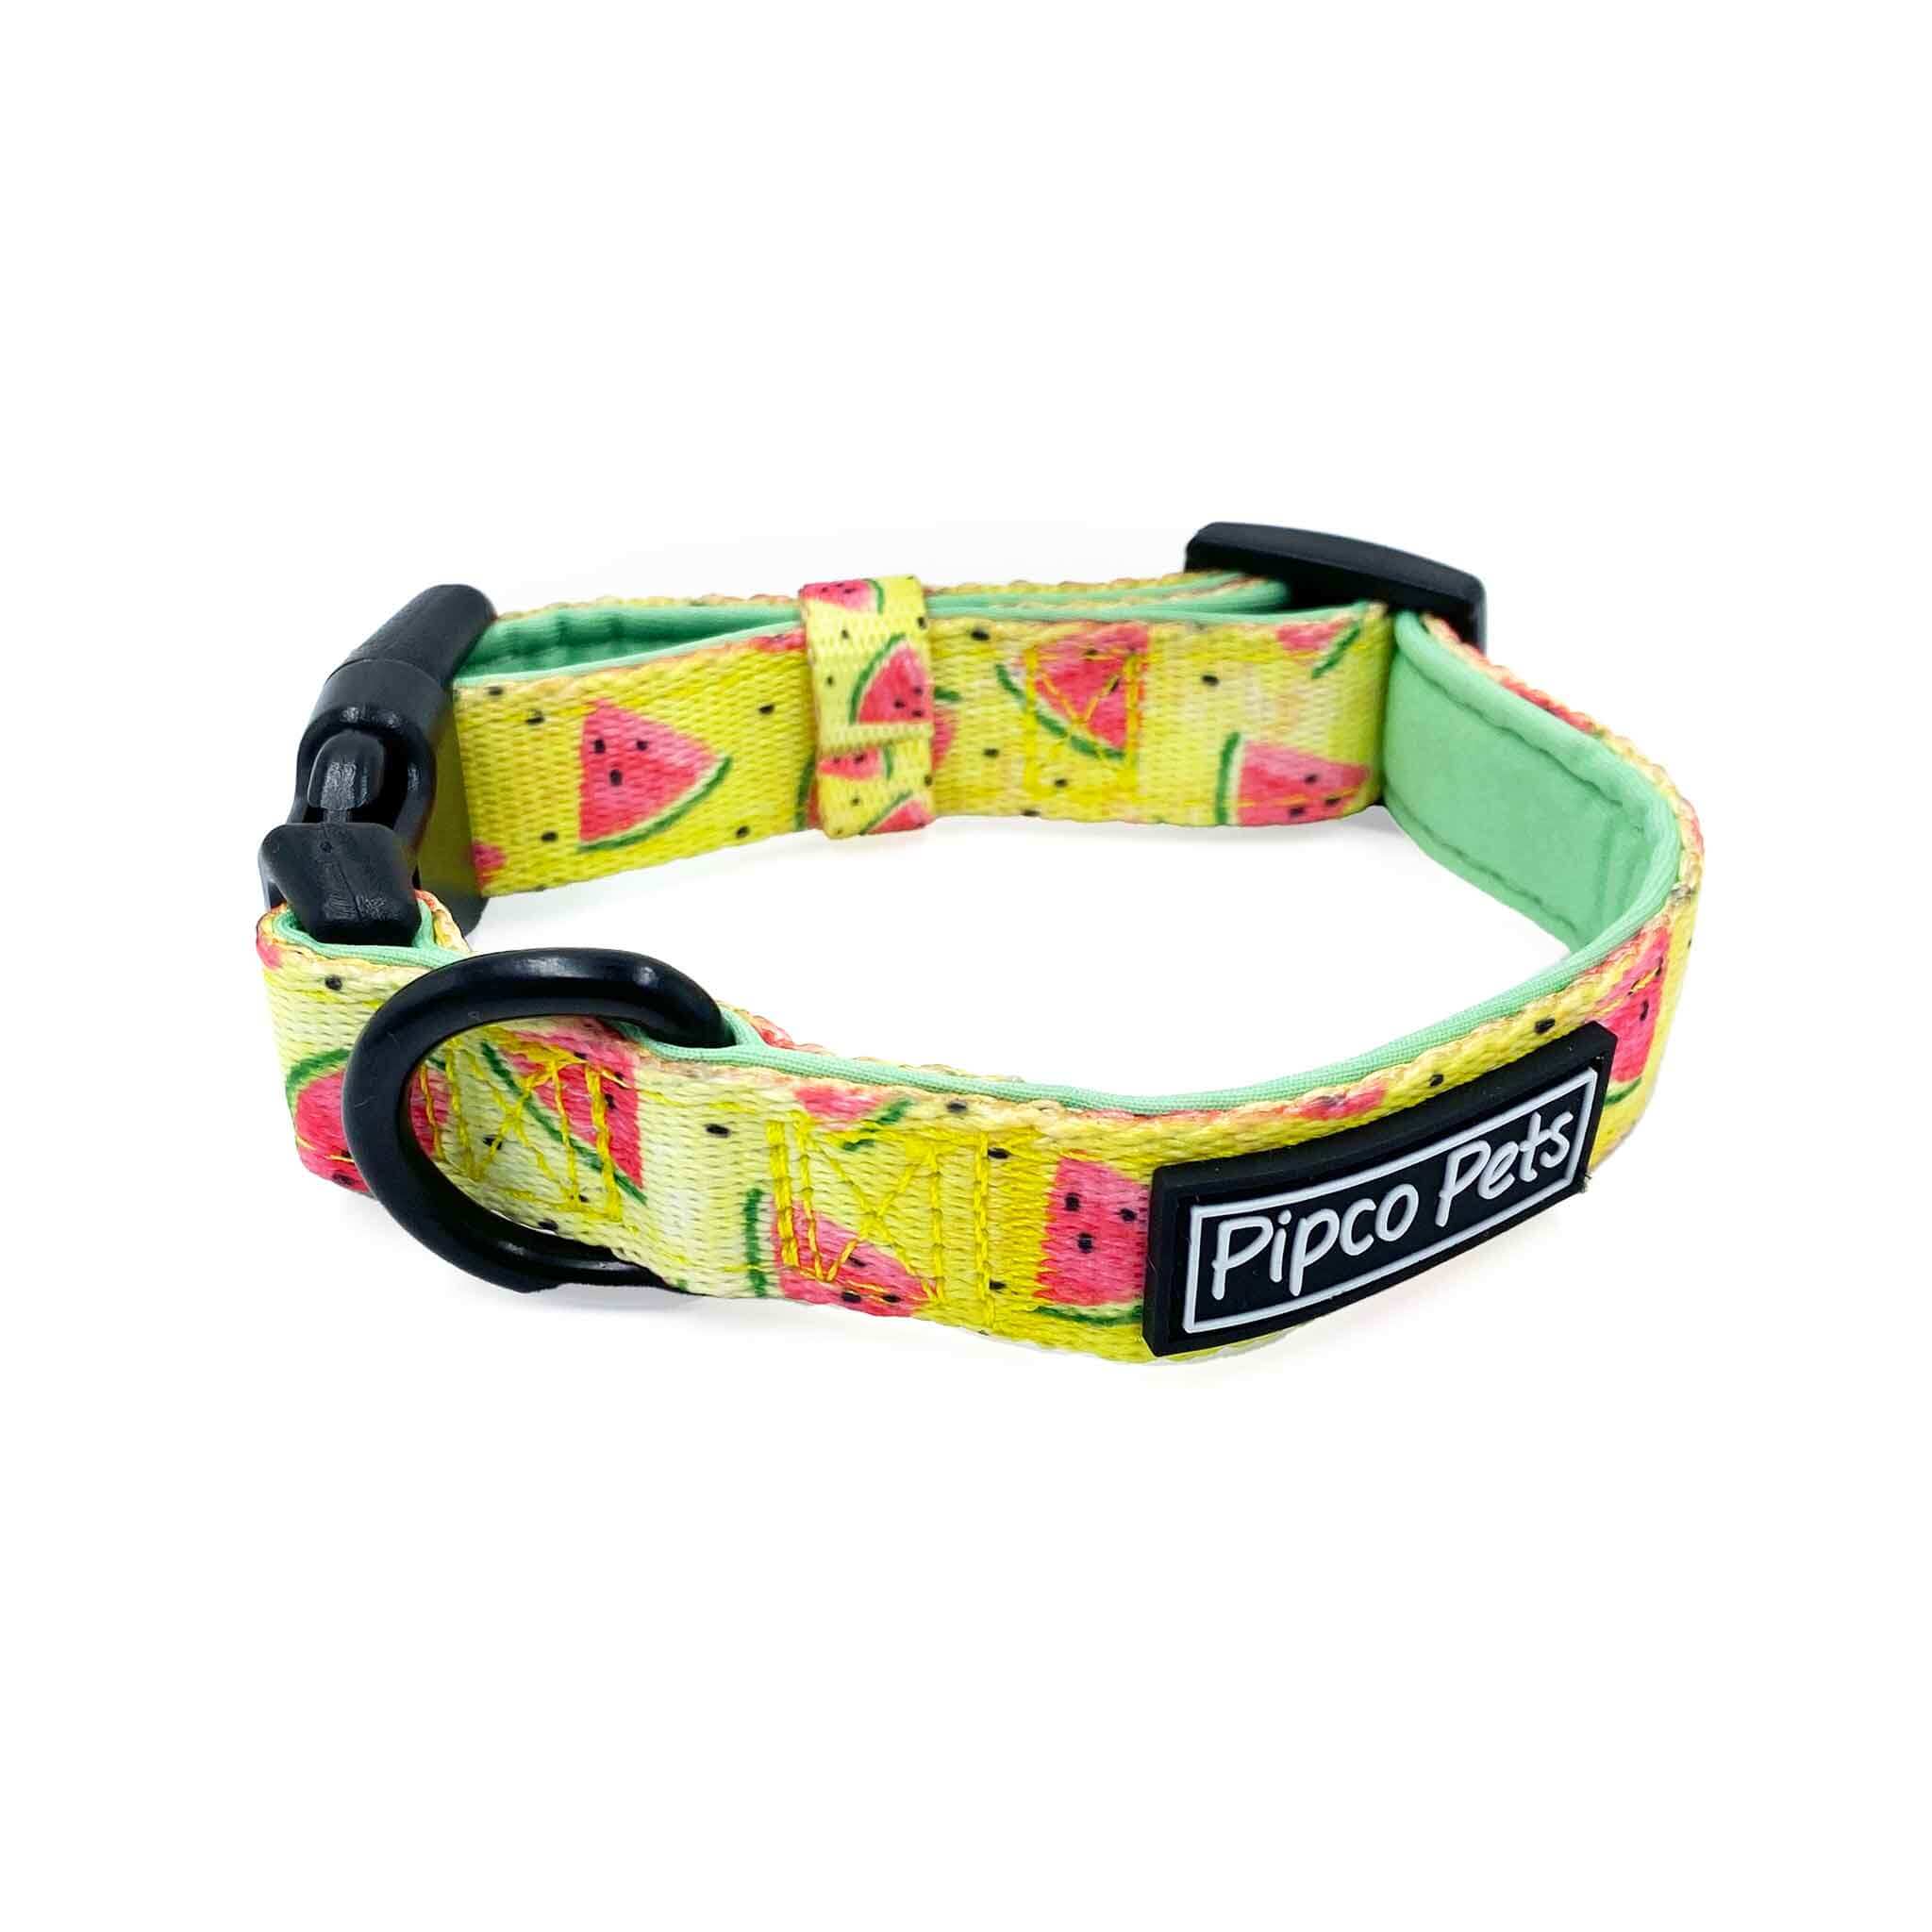 Summer Pipco Pets dog collar with Melons watermelon print pattern in yellow